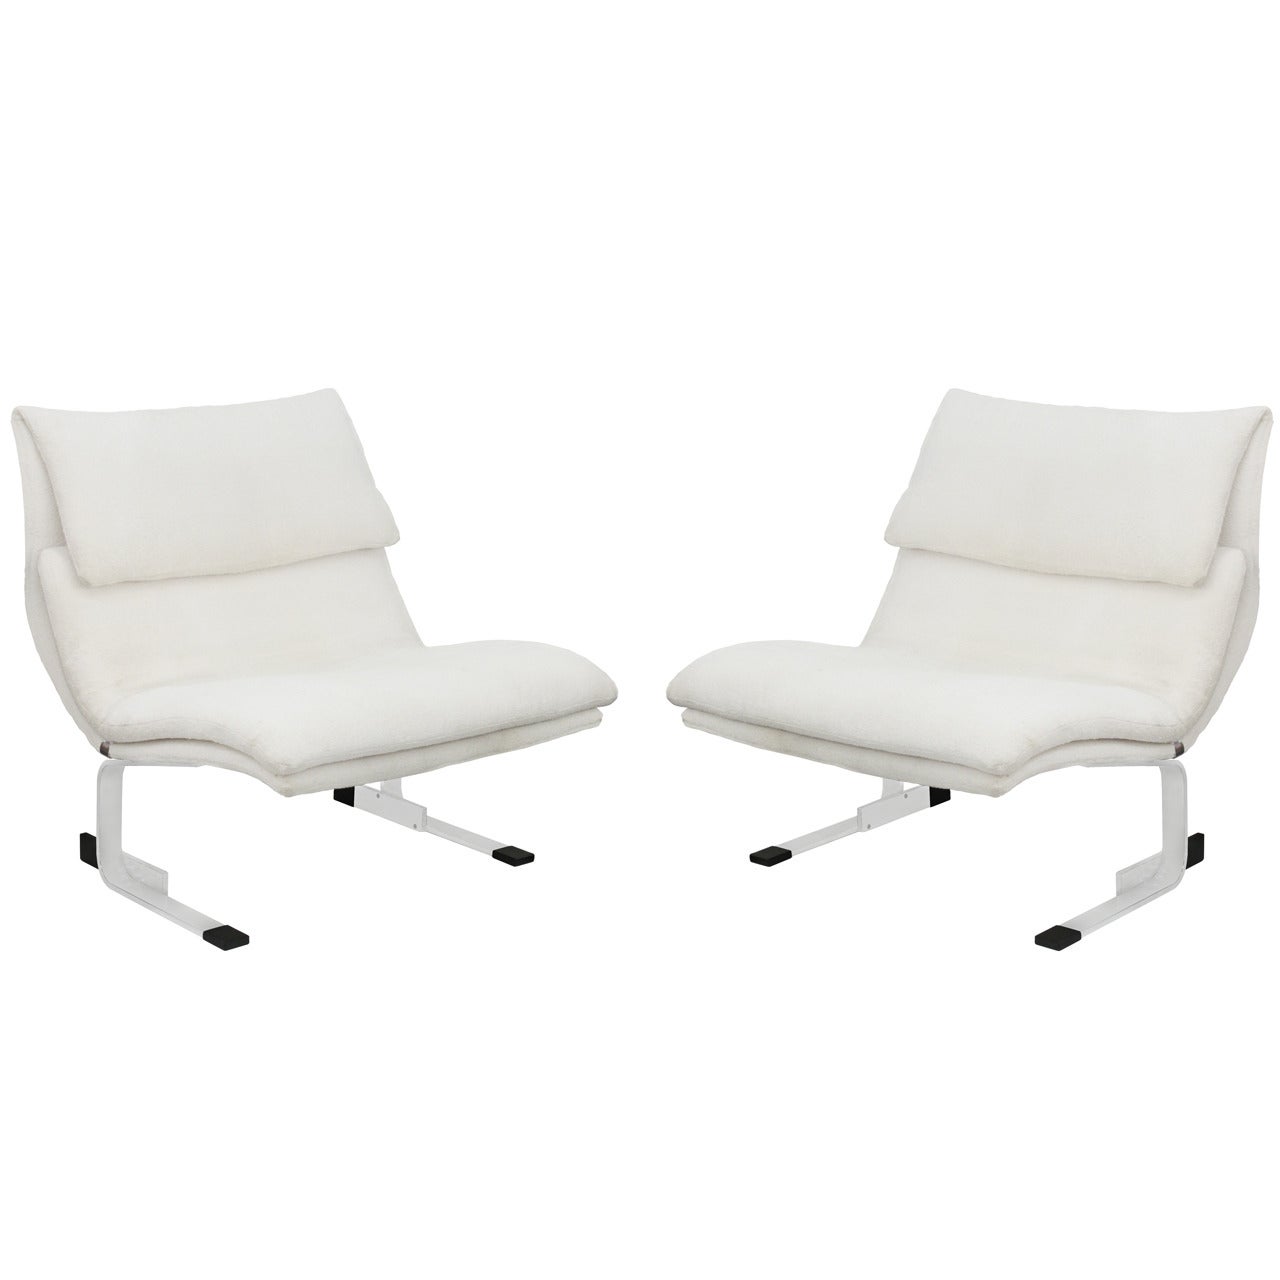 Pair of "Onda (Wave) Lounge Chairs" by Giovanni Offredi for Saporiti Italia